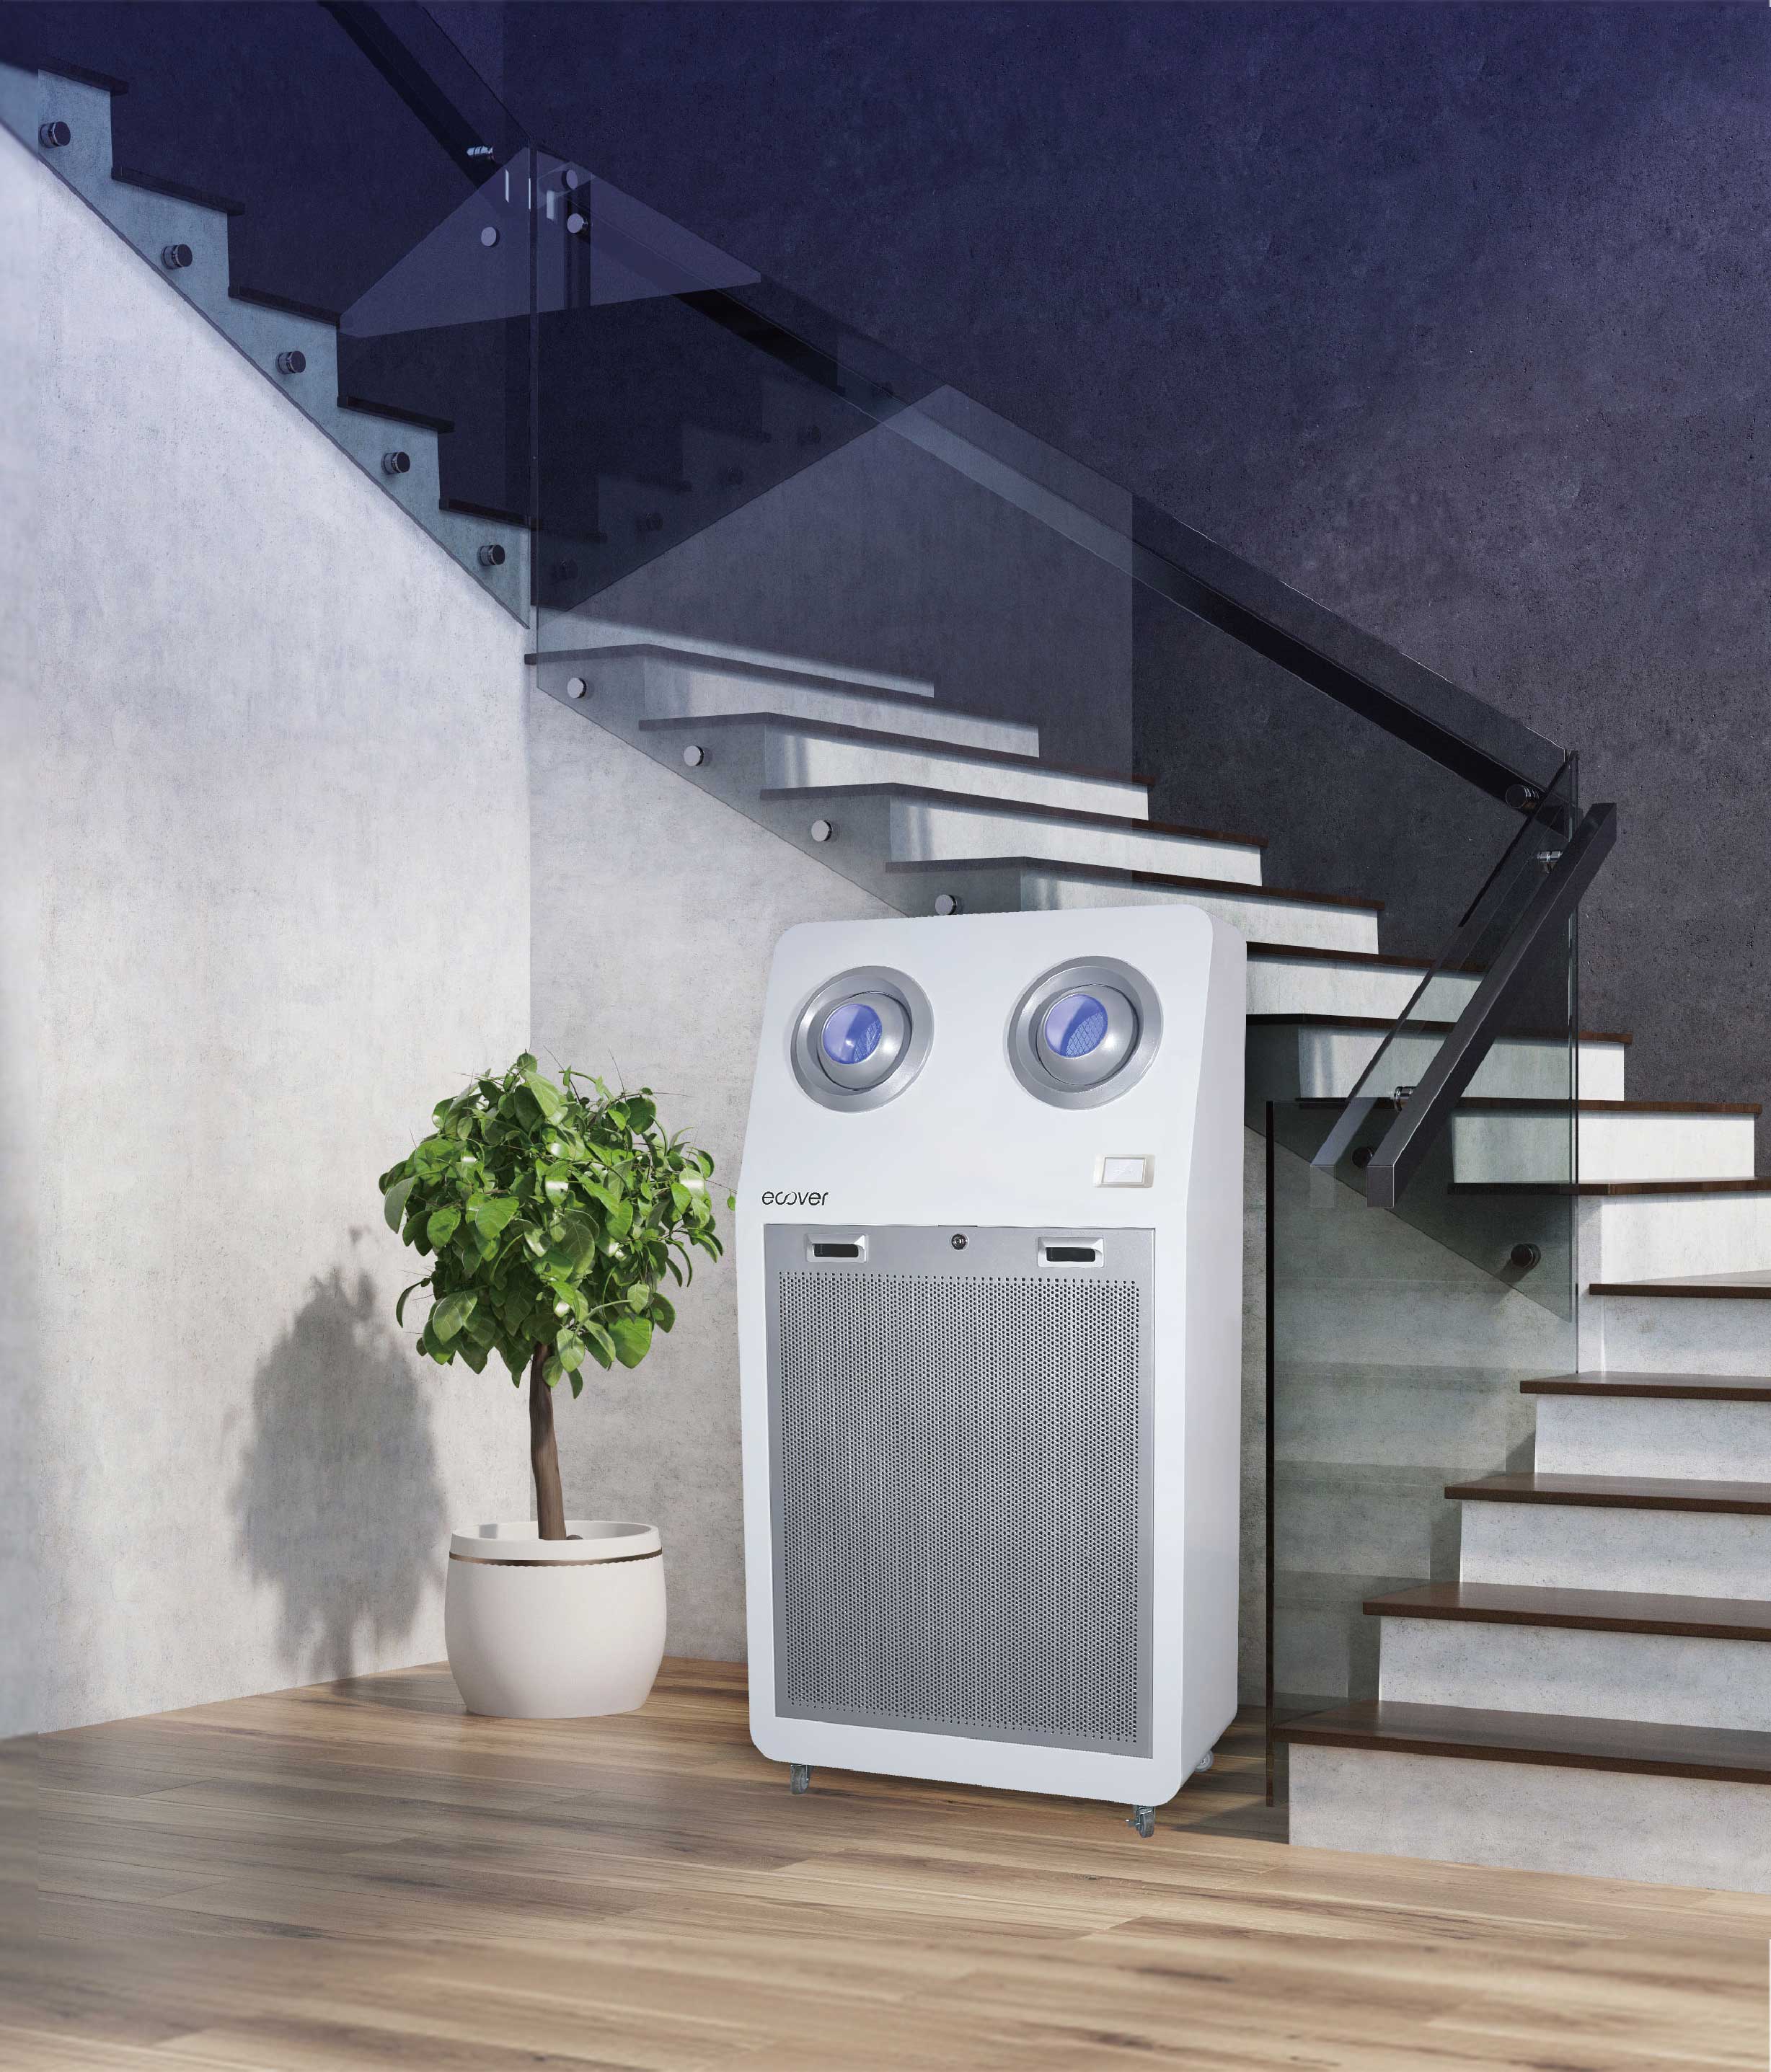 This image shows a Large Capacity Air Purifier Q Series inside a room, next to a staircase and a plant.